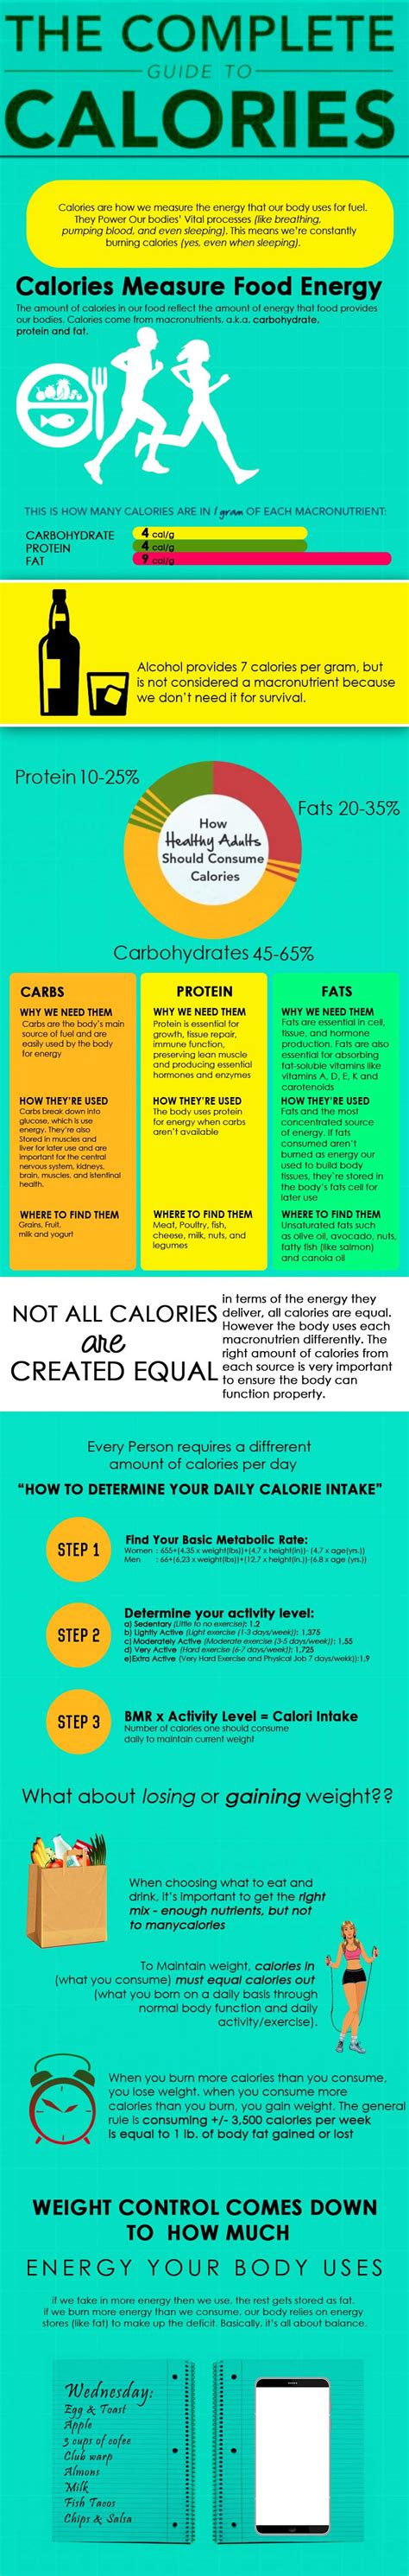 Counting calories is necessary because it ensures you're eating the amount you think you're eating. The Complete Guide to Counting Calories - Info graphic ...